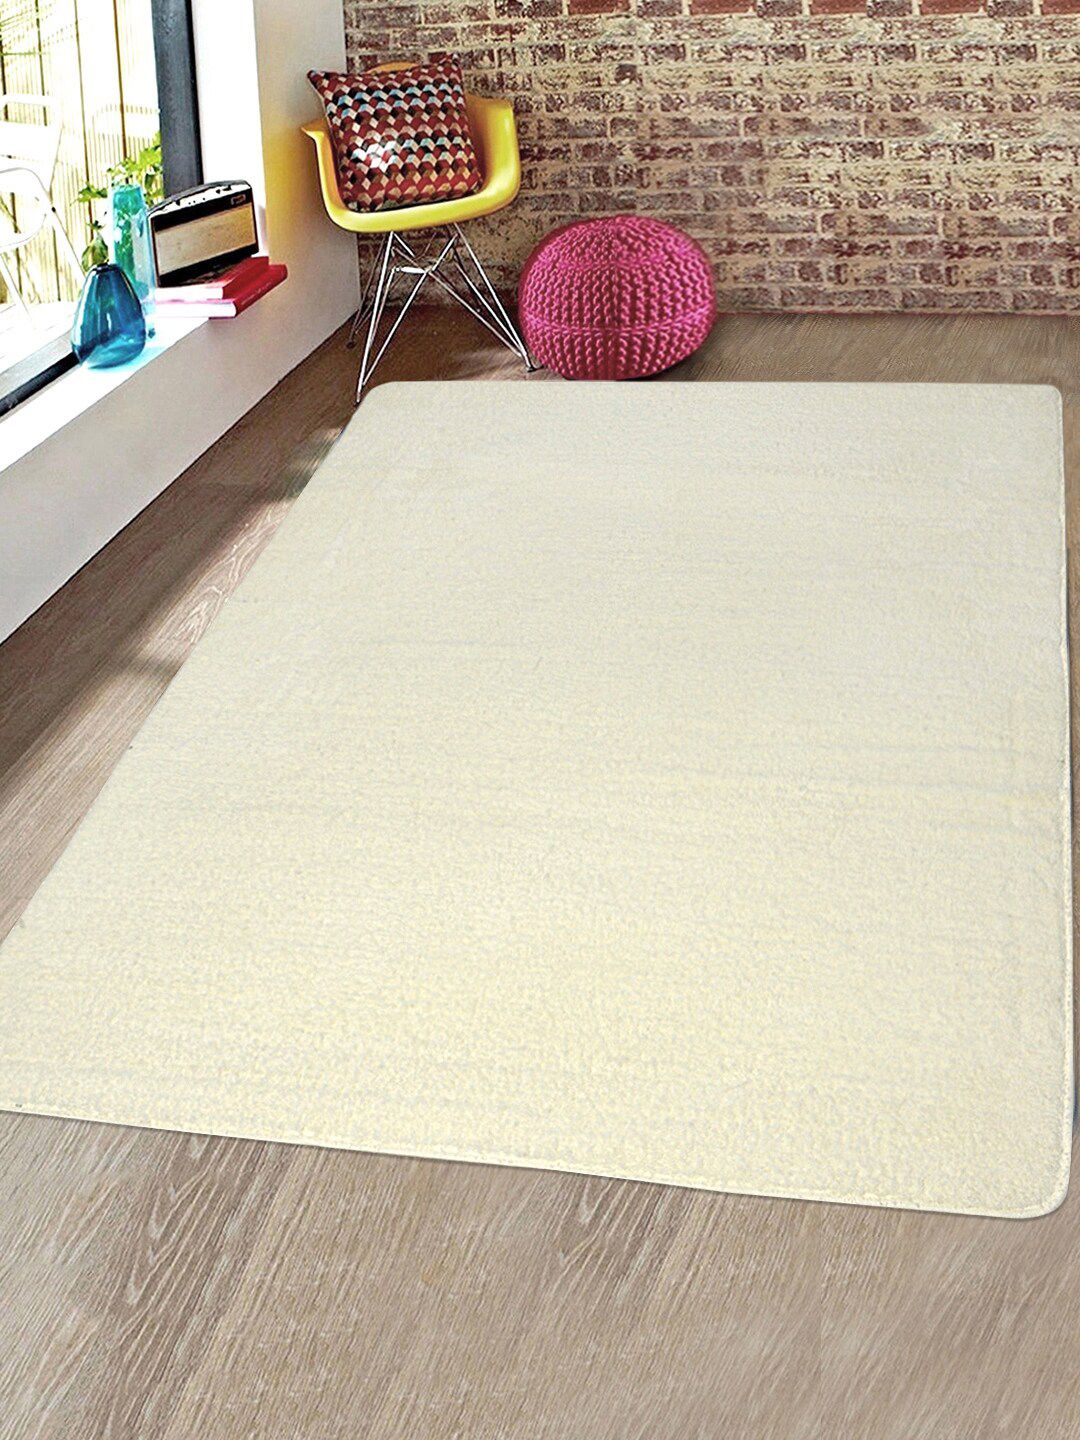 Saral Home Unisex Off White Solid Polyester Shaggy Yarn Anti-skid Carpet Price in India